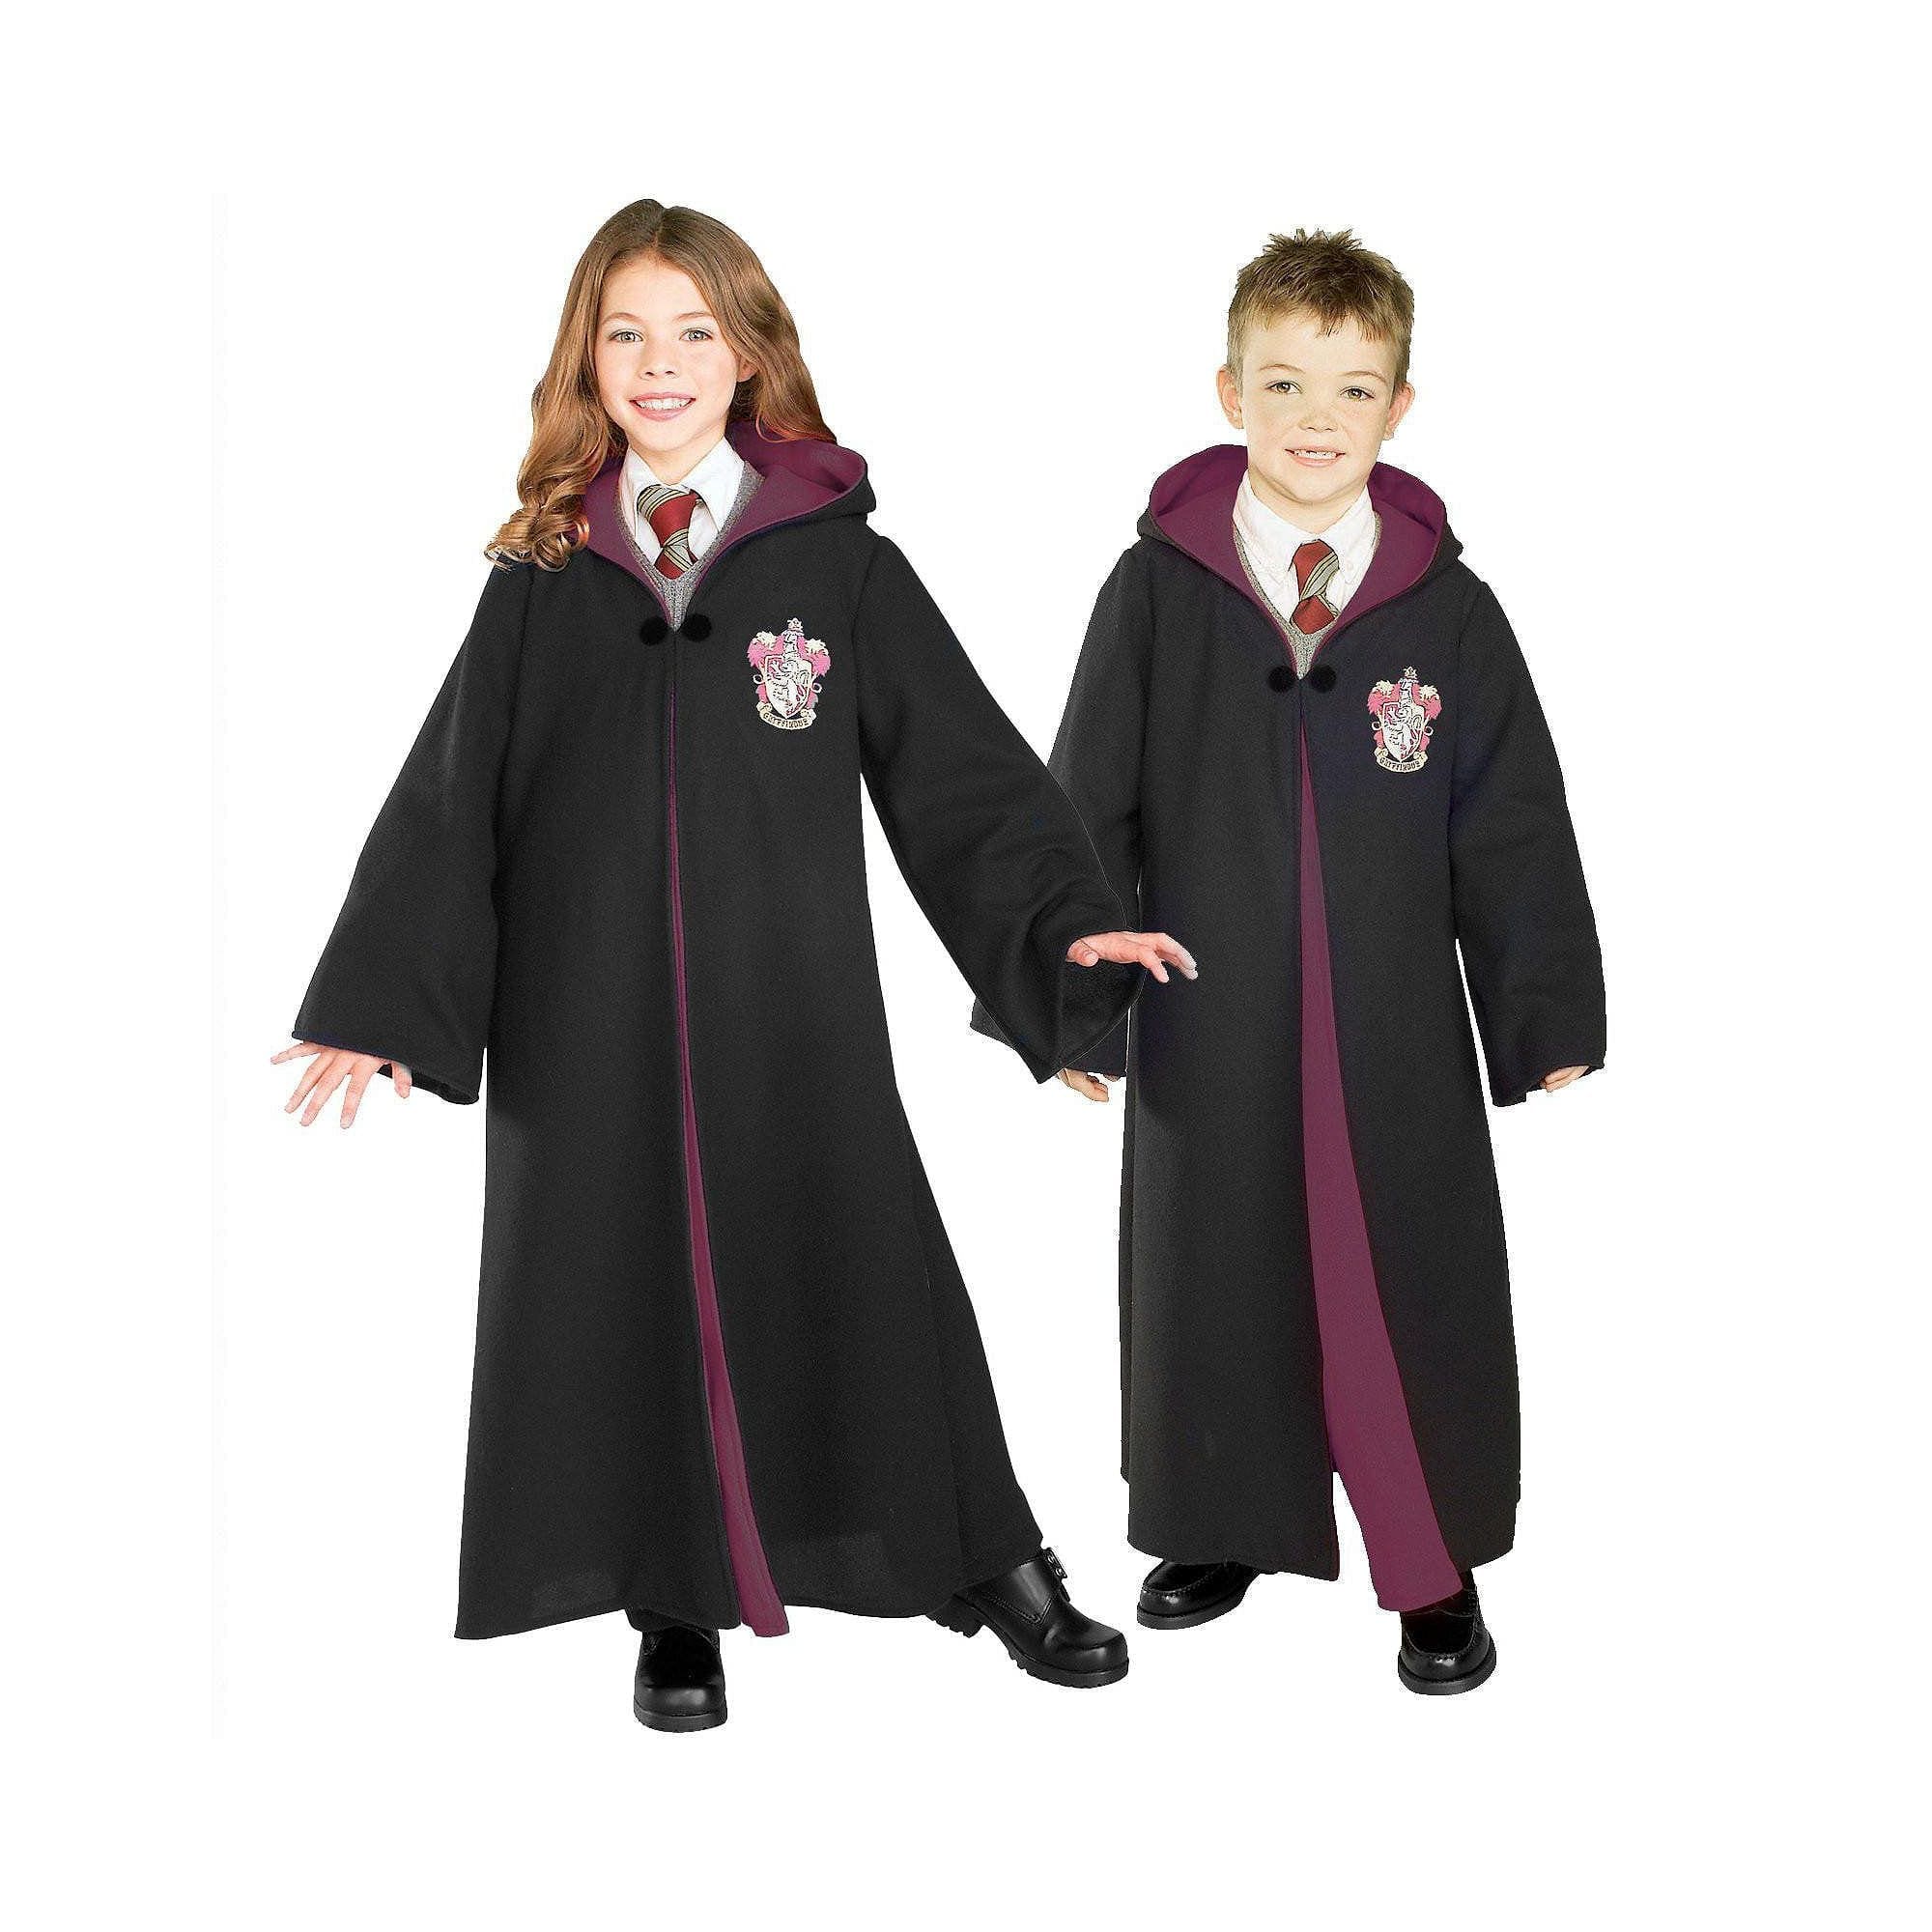 Child's Deluxe Gryffindor Robe - Harry Potter - The Party Place